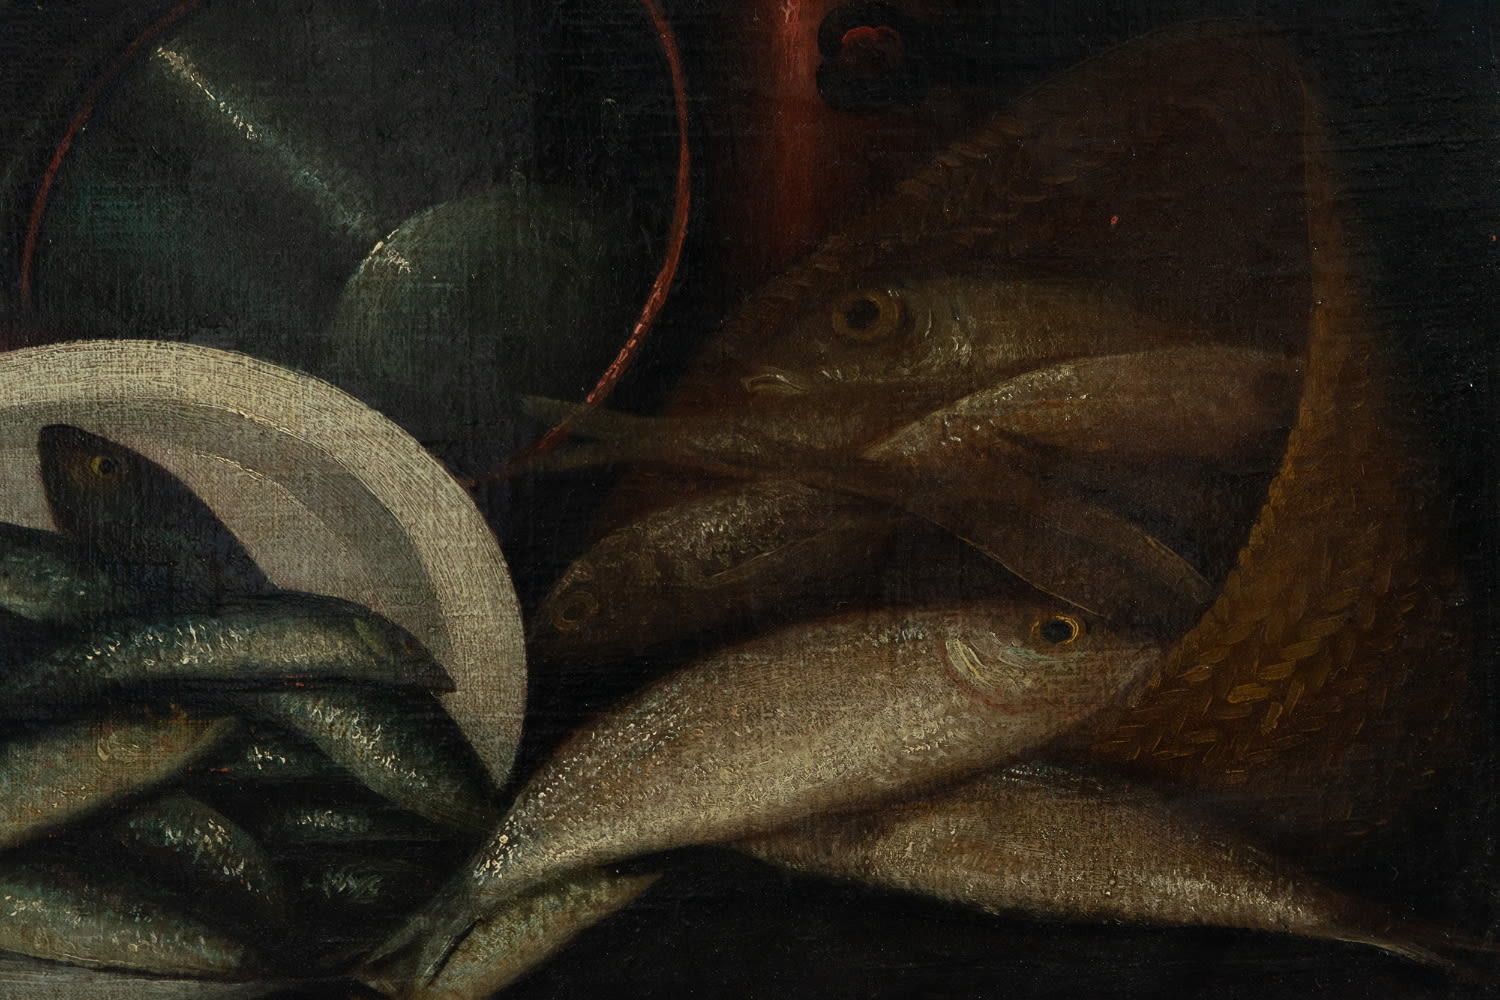 Pair of Still Lifes of Cat with Fish and Fruit, Italian school of the 18th - 19th century - Image 4 of 8